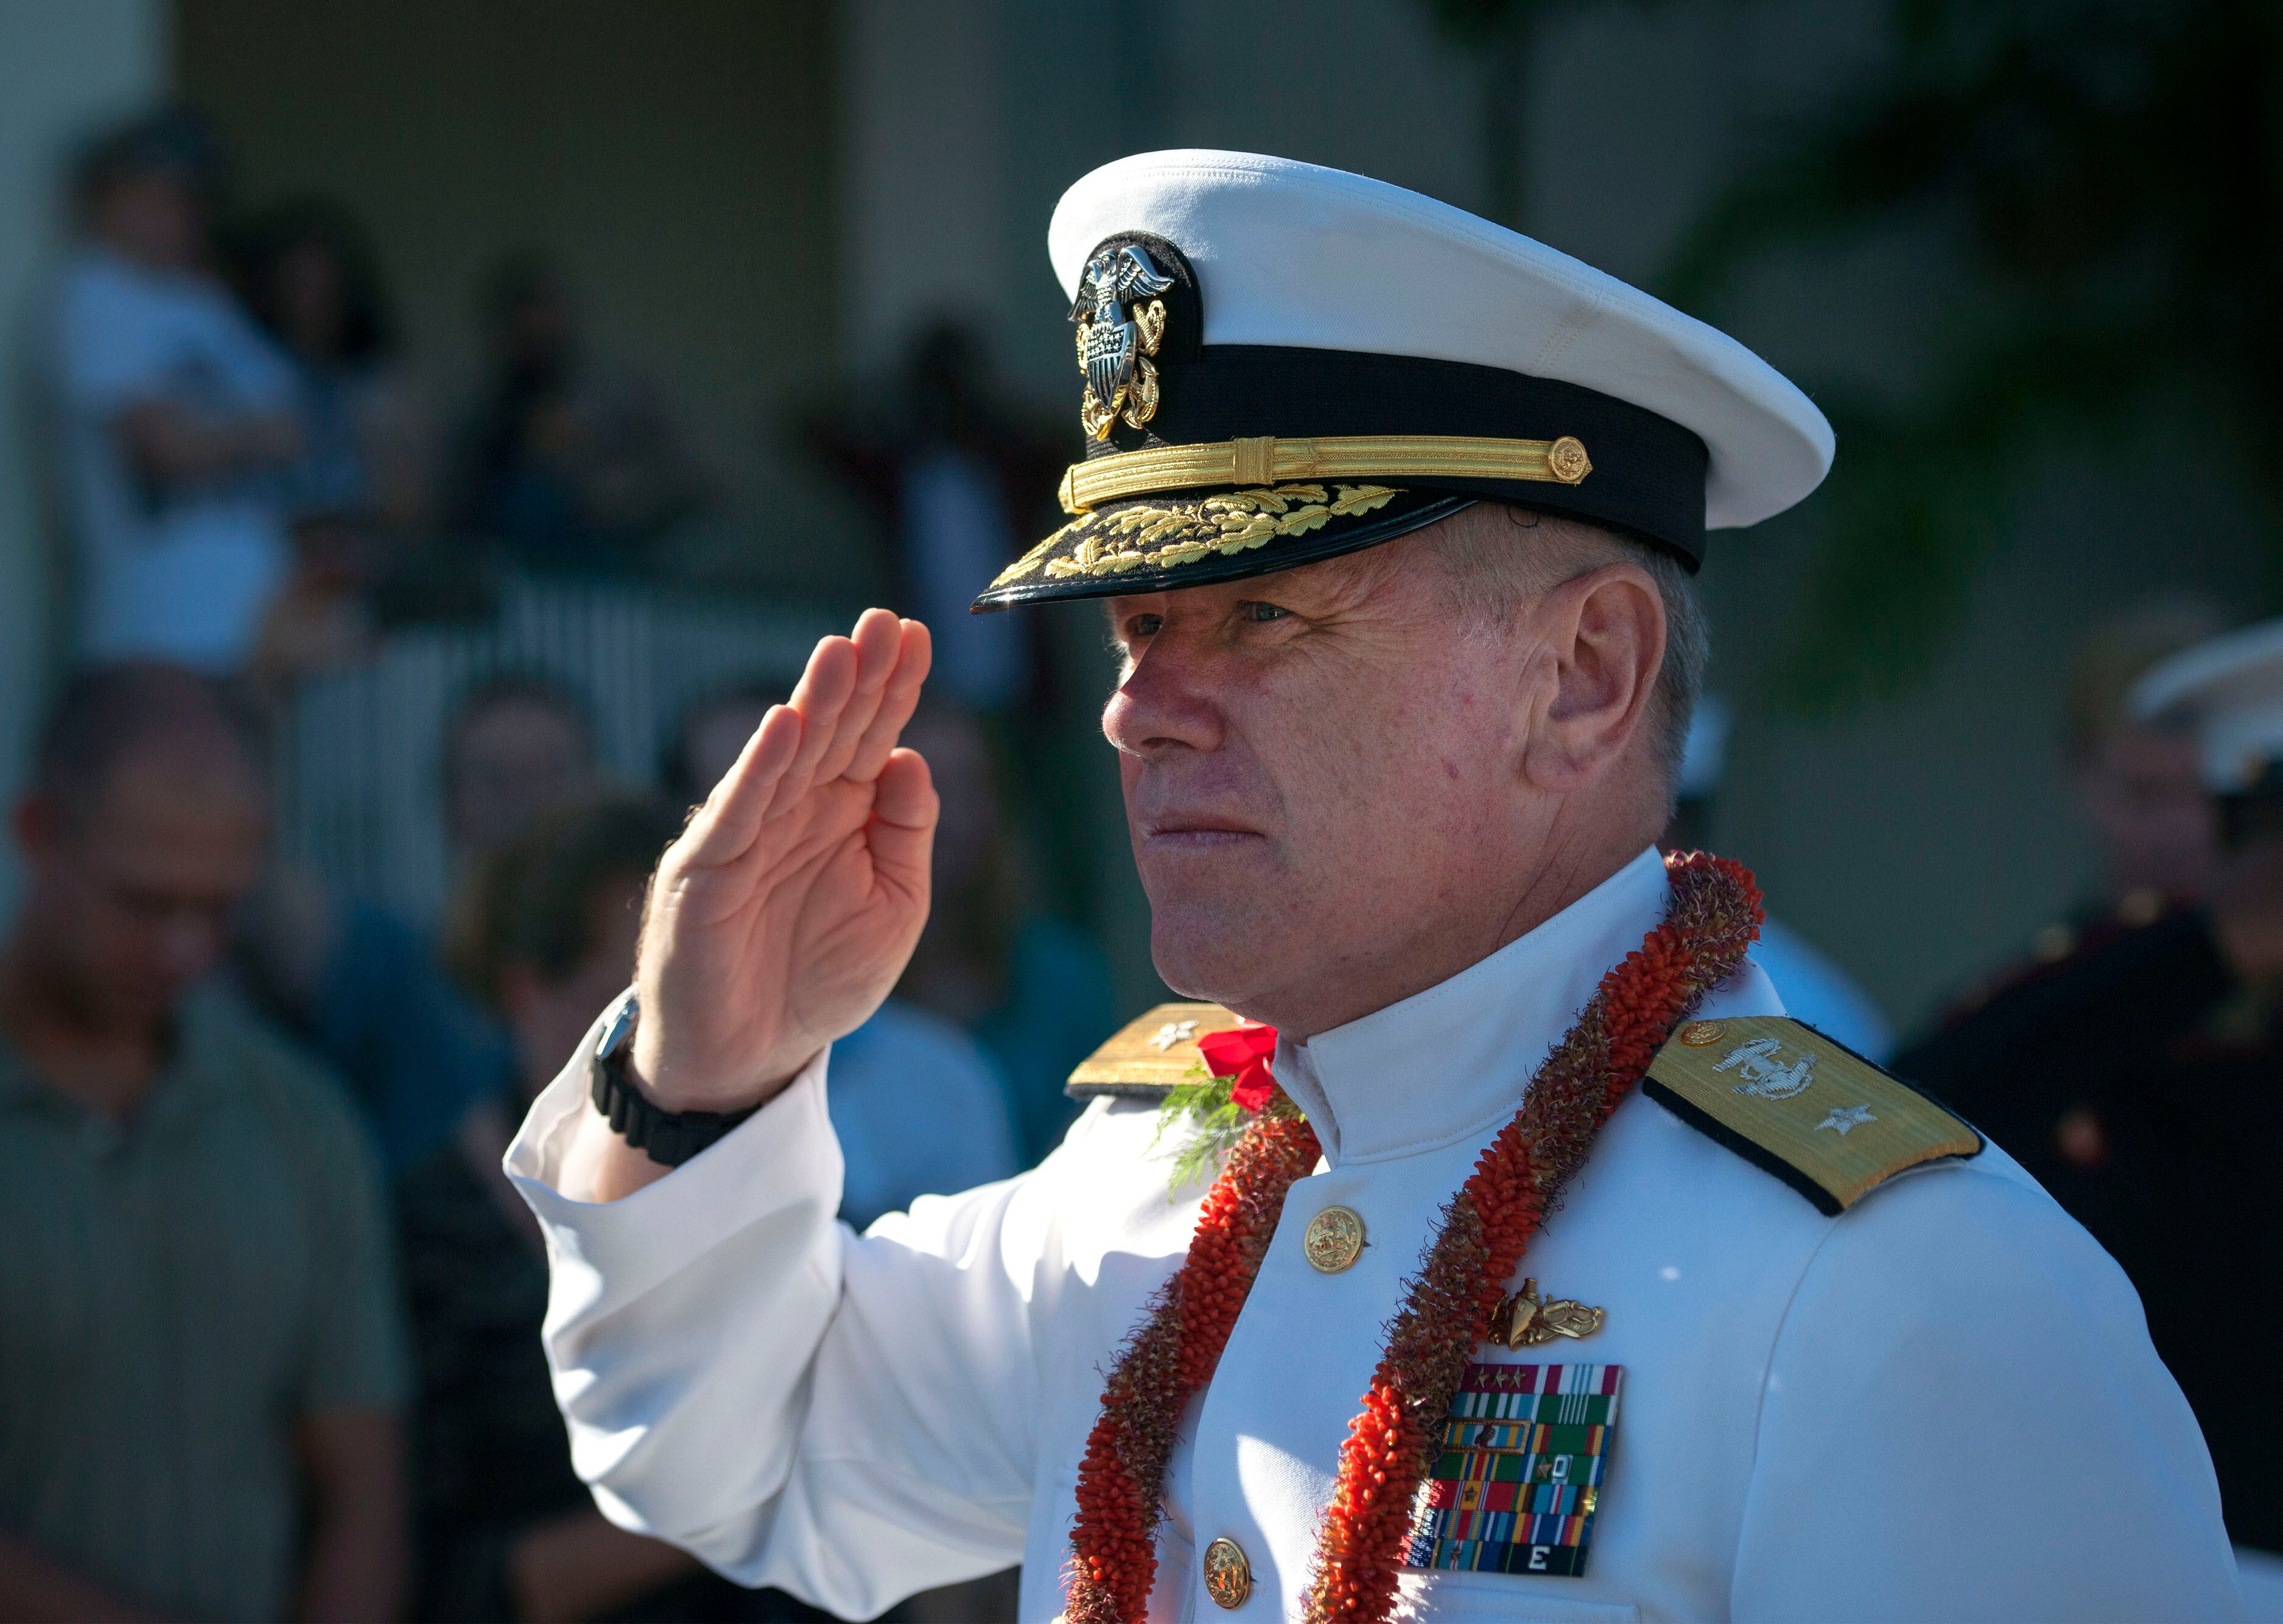 Wwii Military Porn - Navy strike group commander fired for viewing porn at work